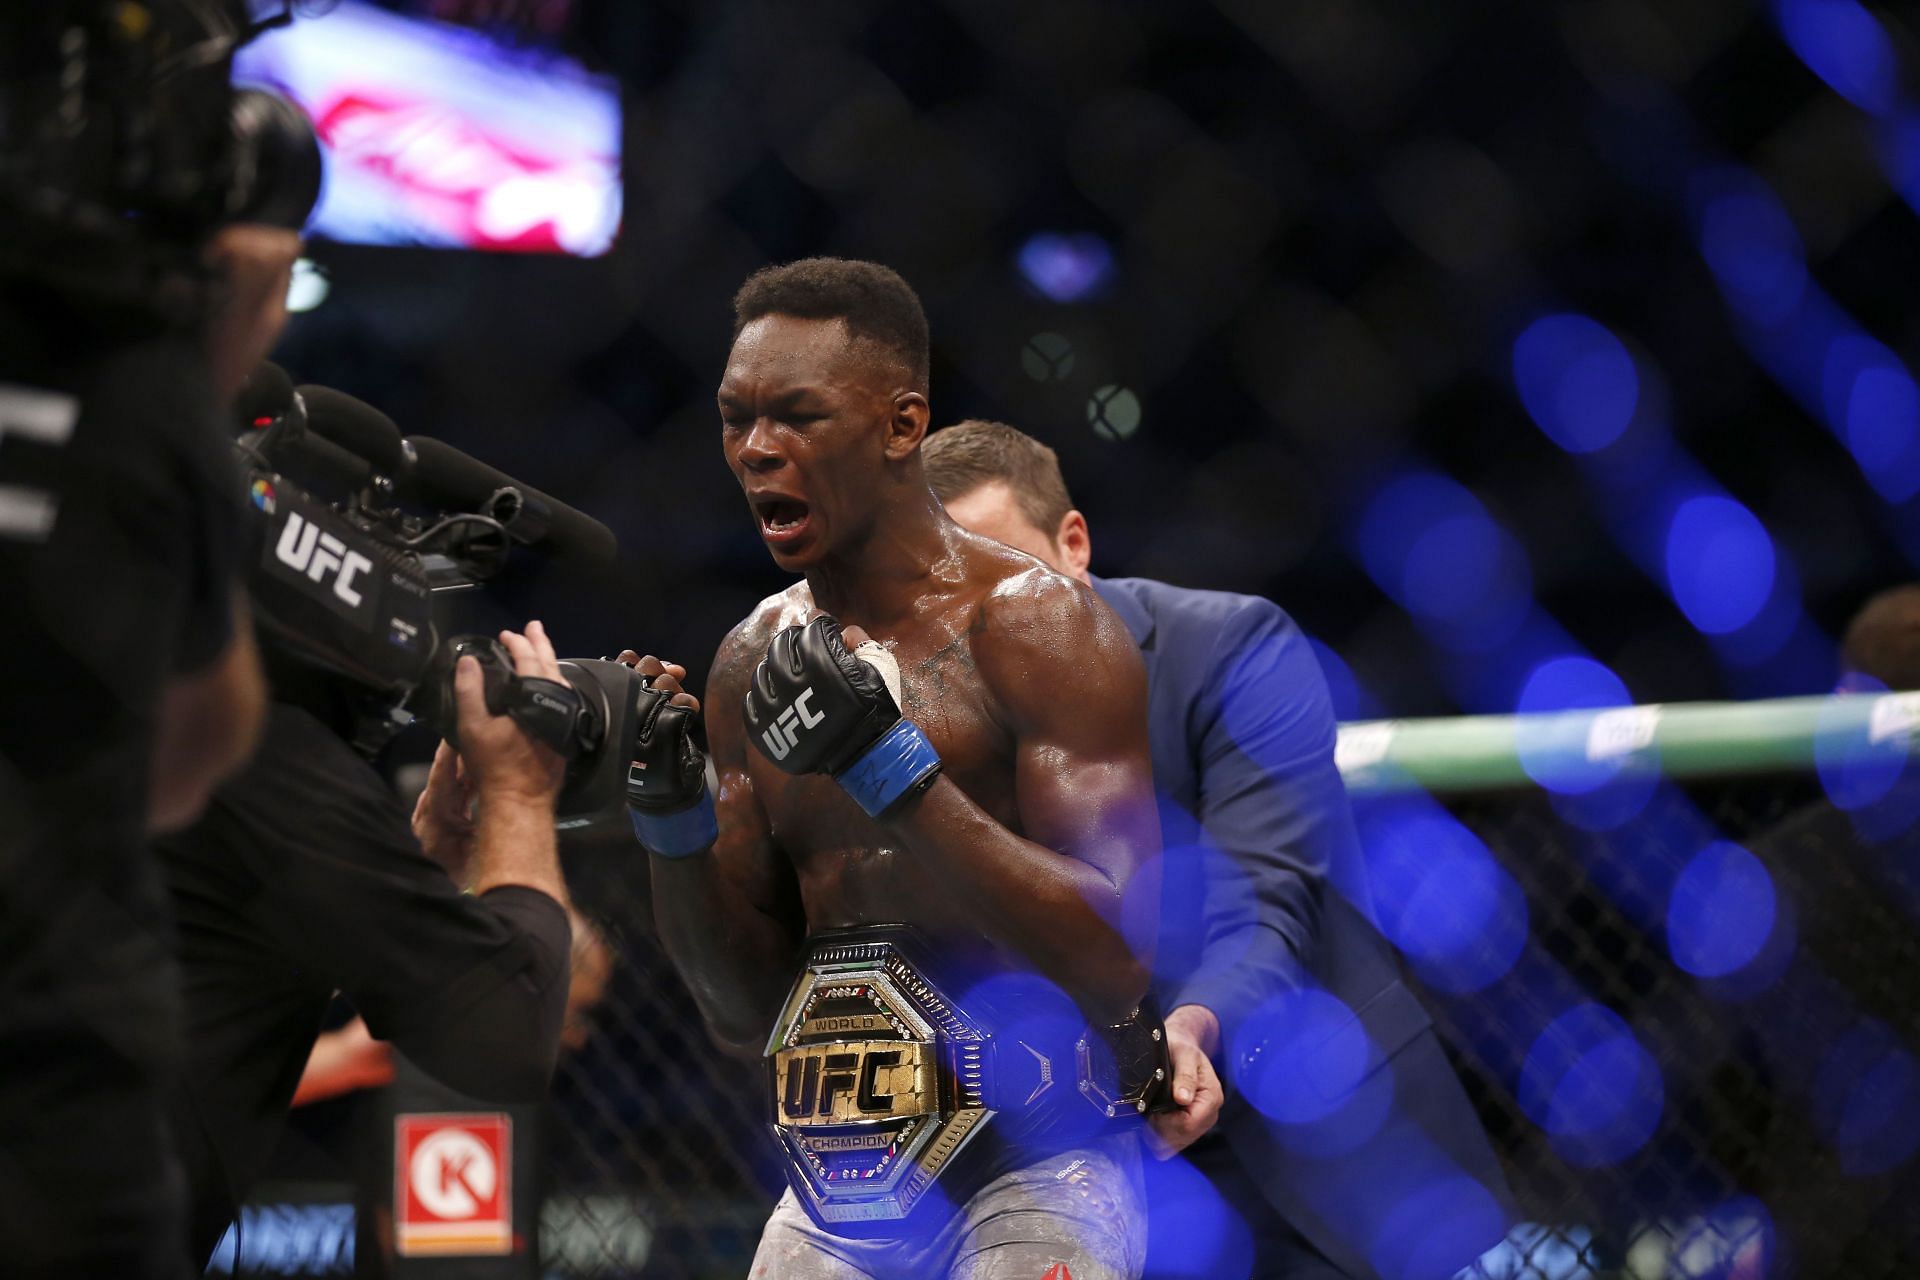 No fighter clambered through the UFC&#039;s rankings quite as quickly as Israel Adesanya did